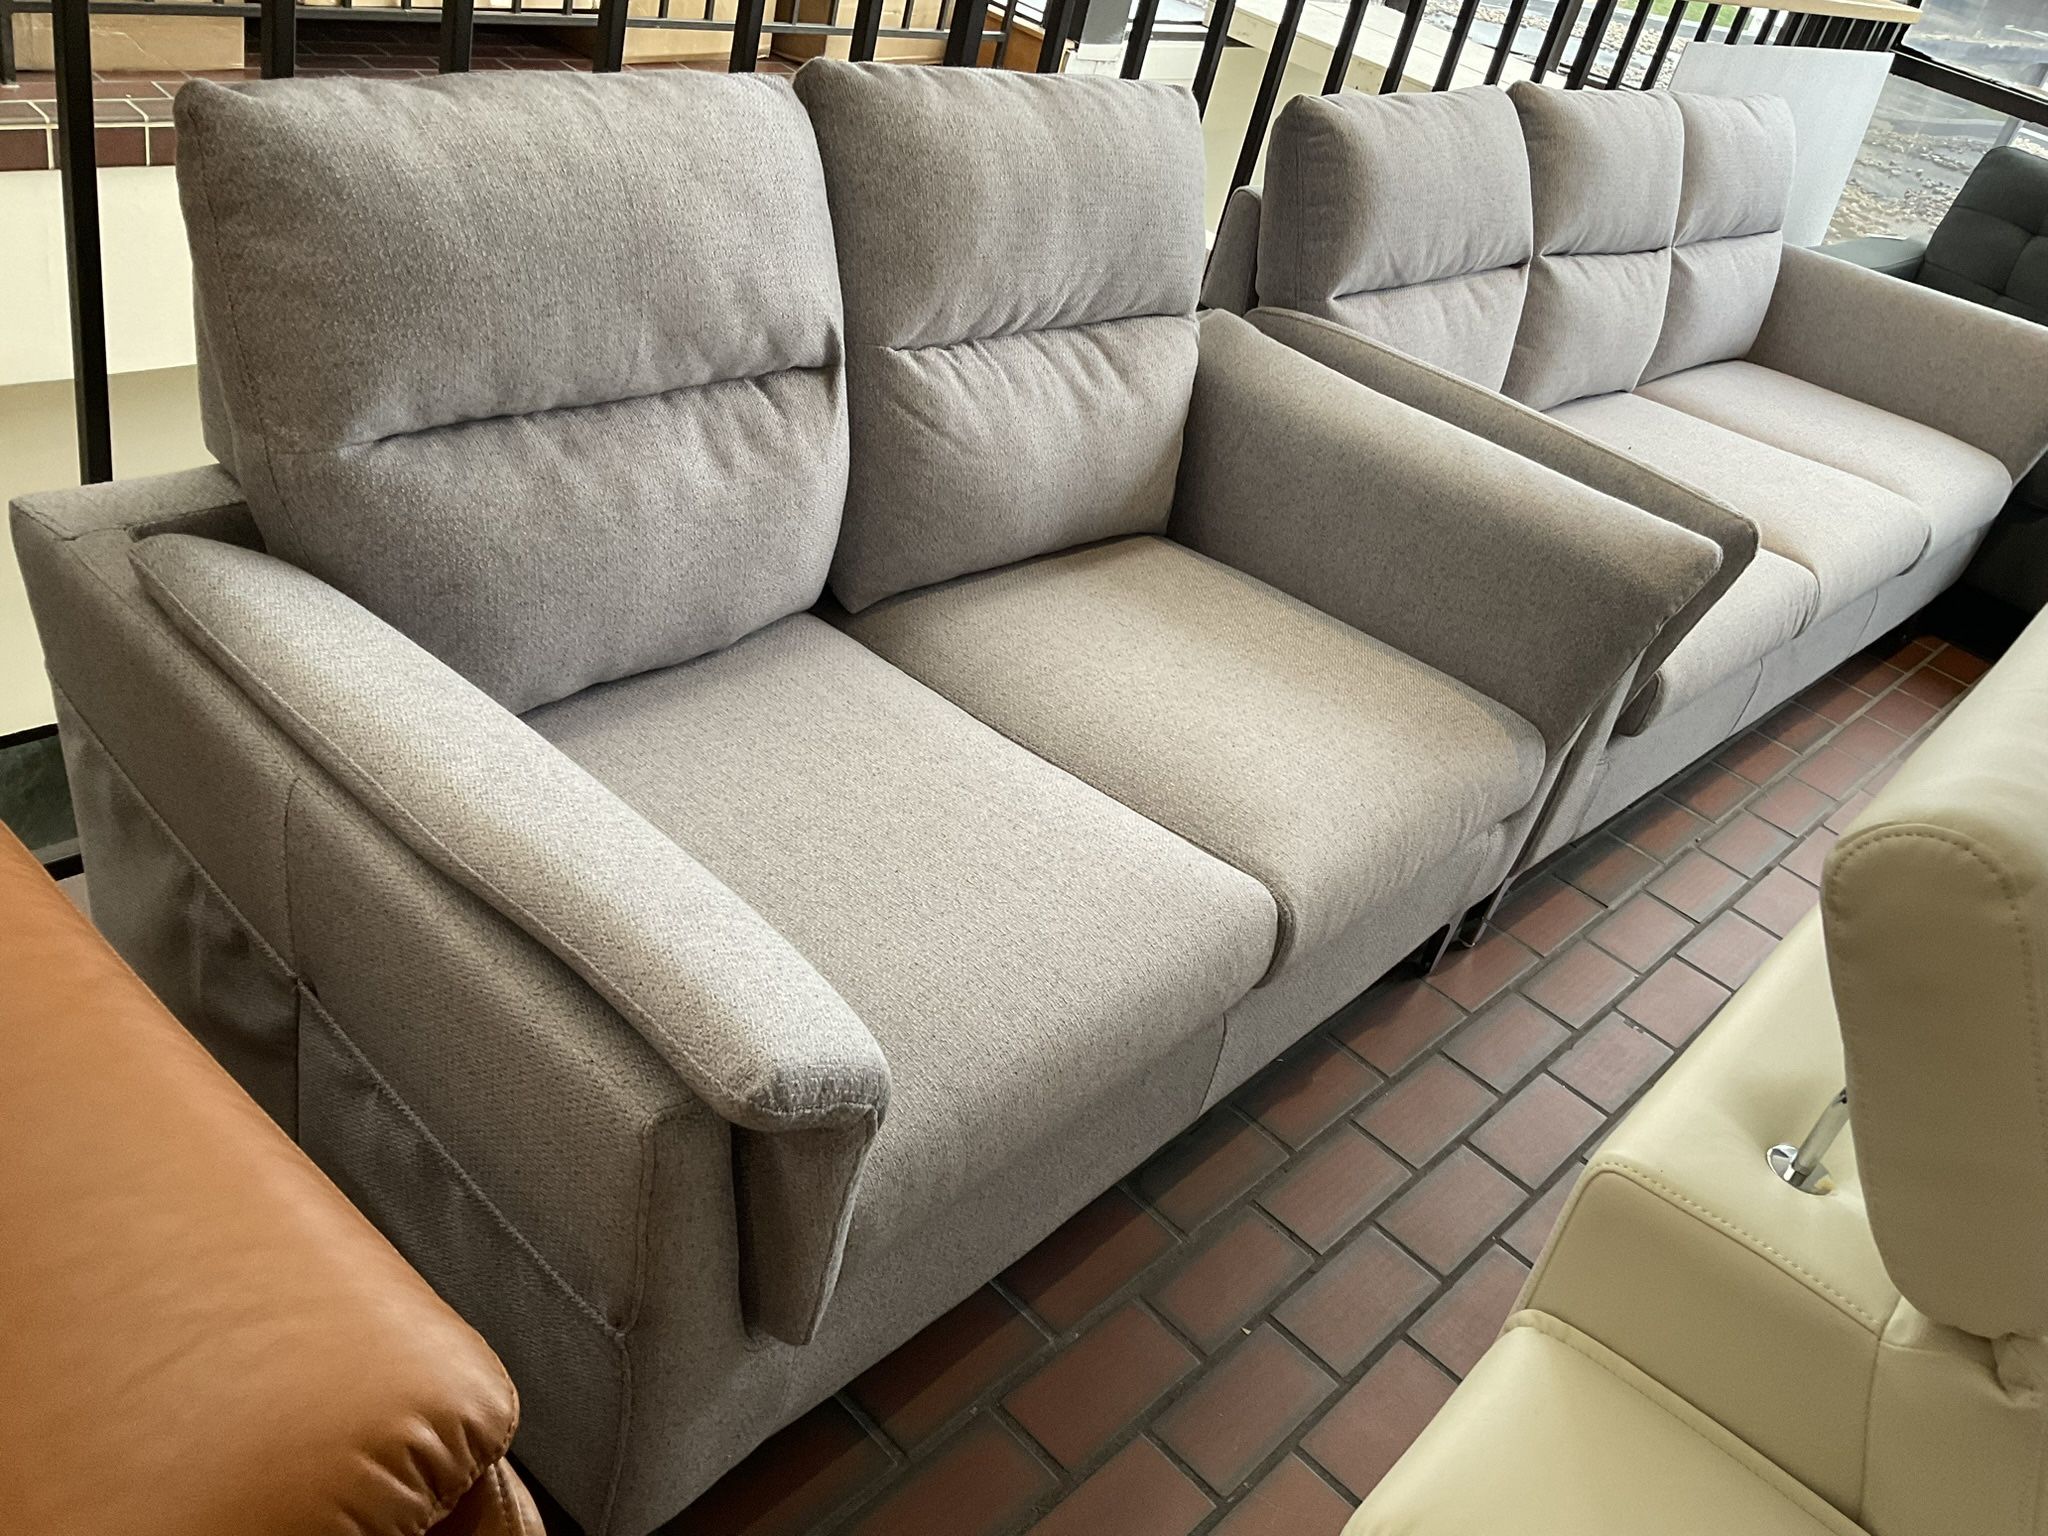 New Sofa with loveseat gray color fabric upholstered